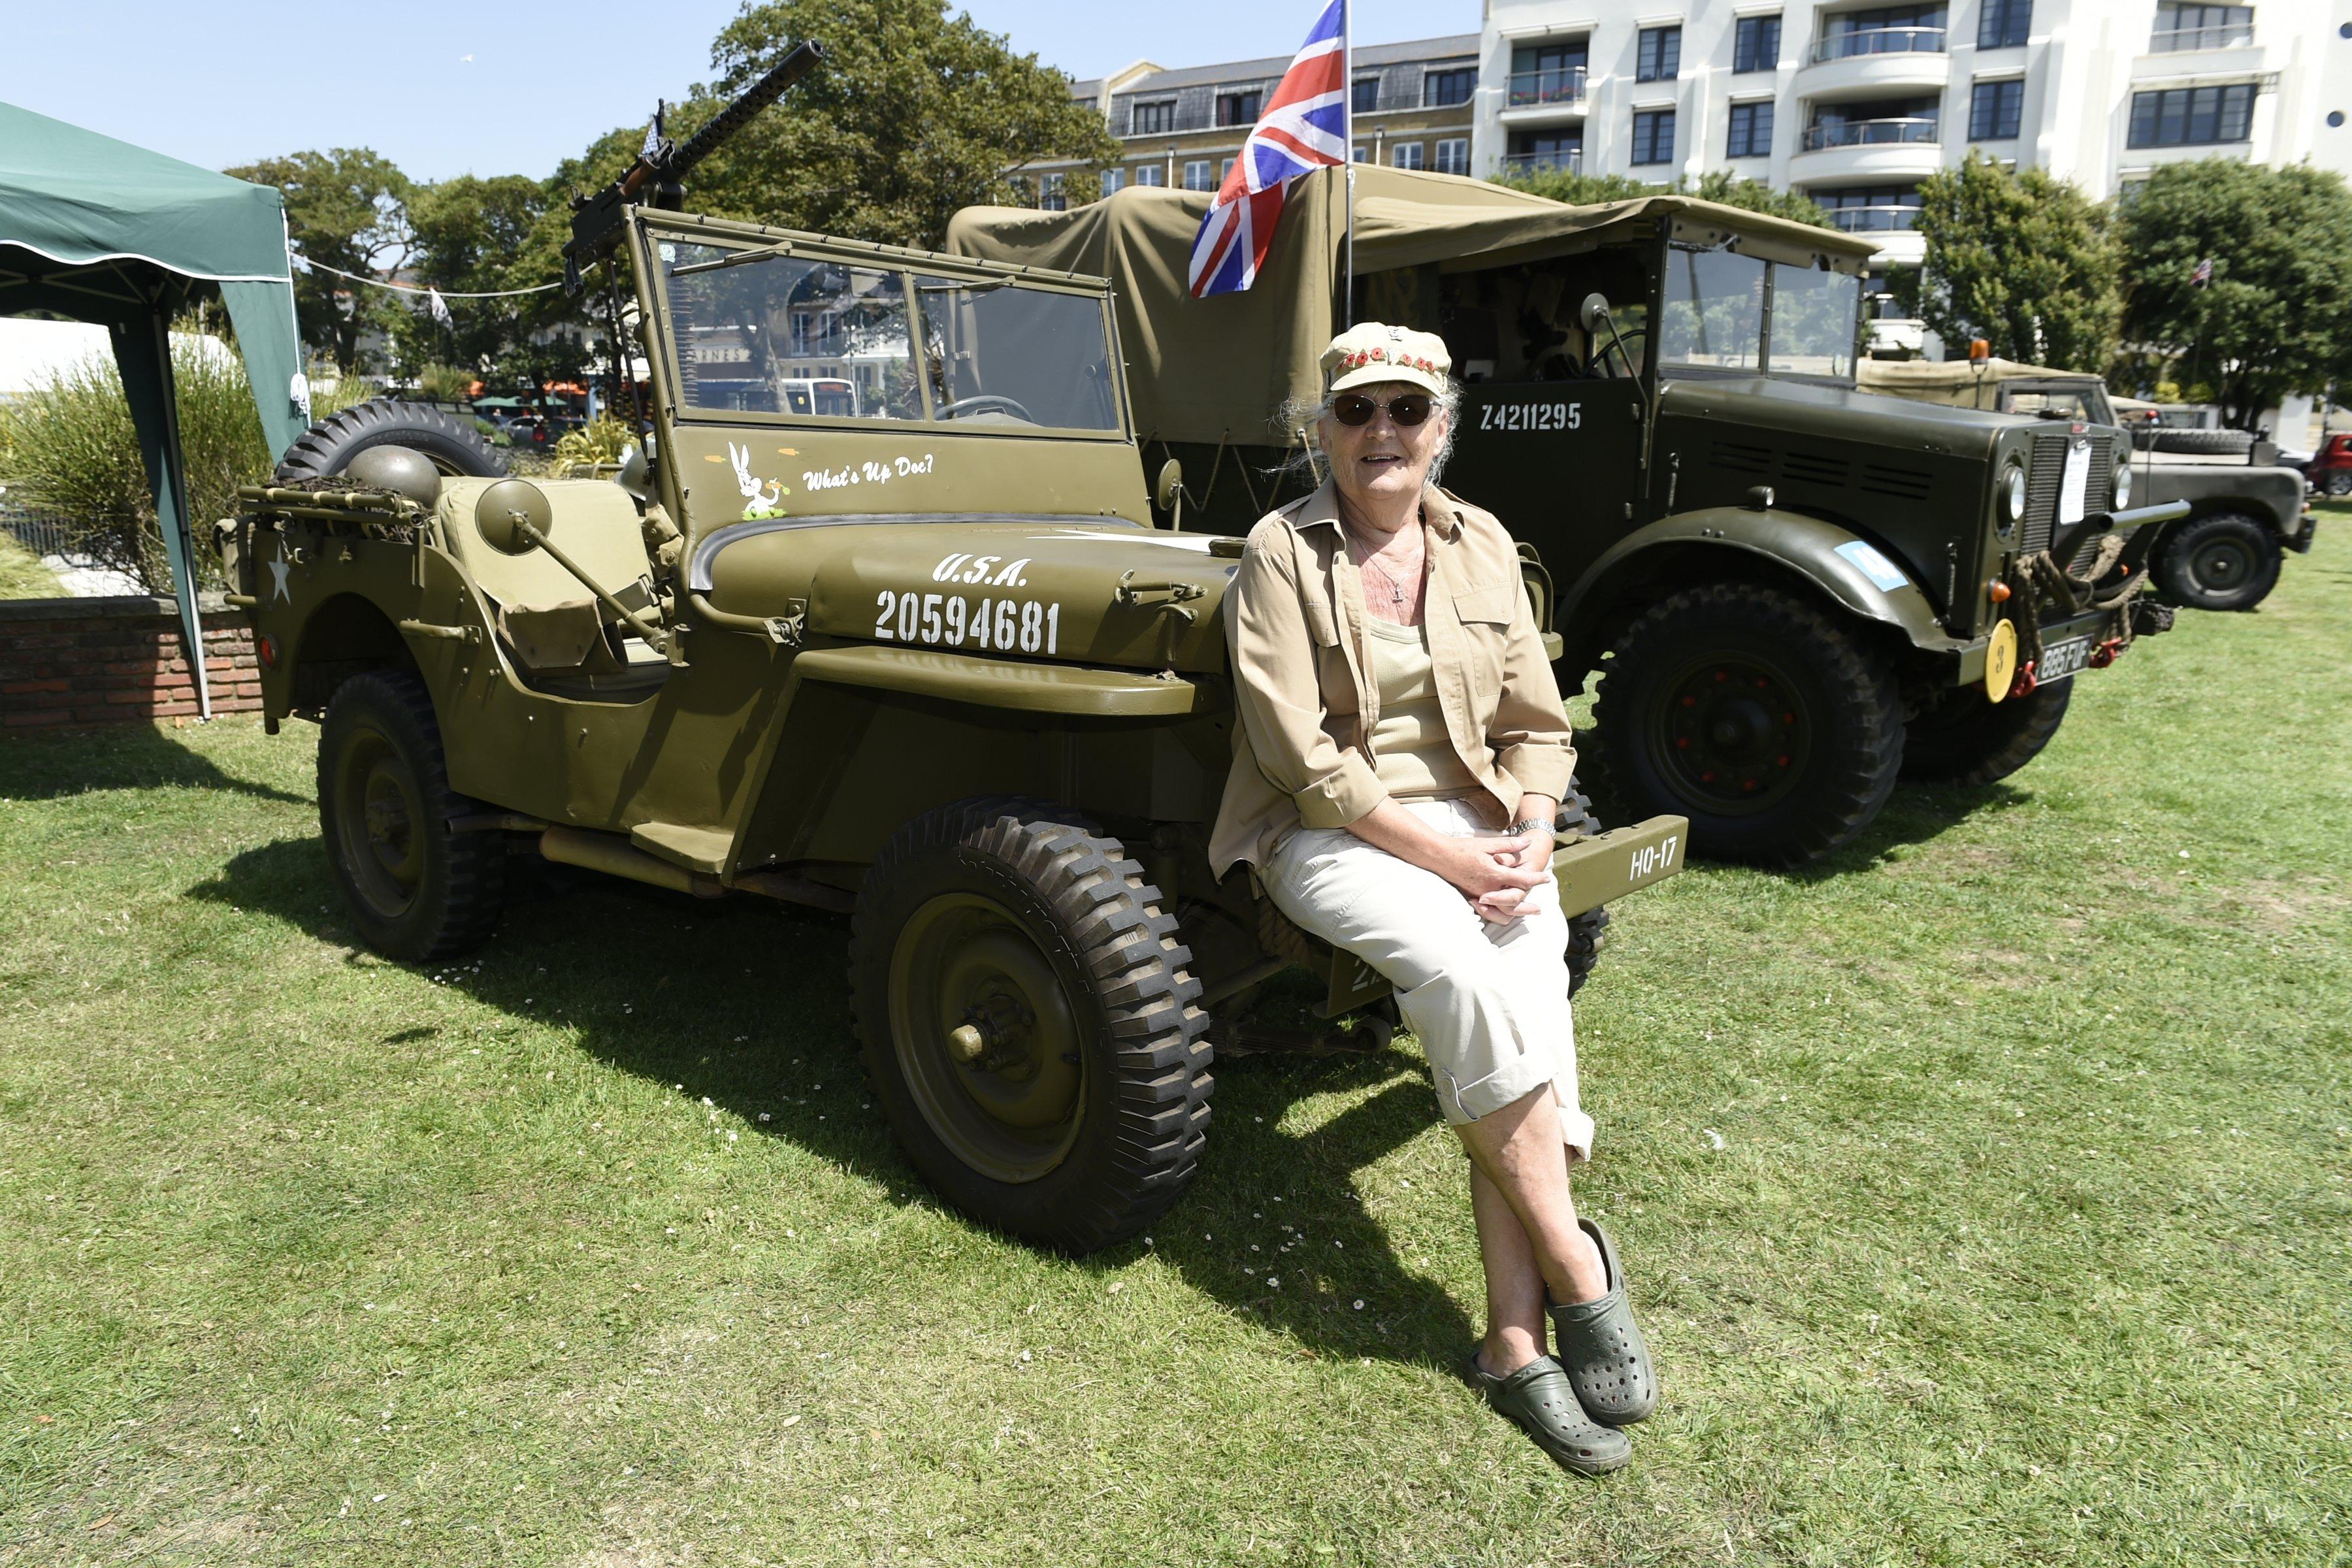 West Sussex Armed Forces Weekend in Worthing is expected to tie in with Armed Forces Day 2020 on Saturday, June 27. Picture: Liz Pearce LP190661